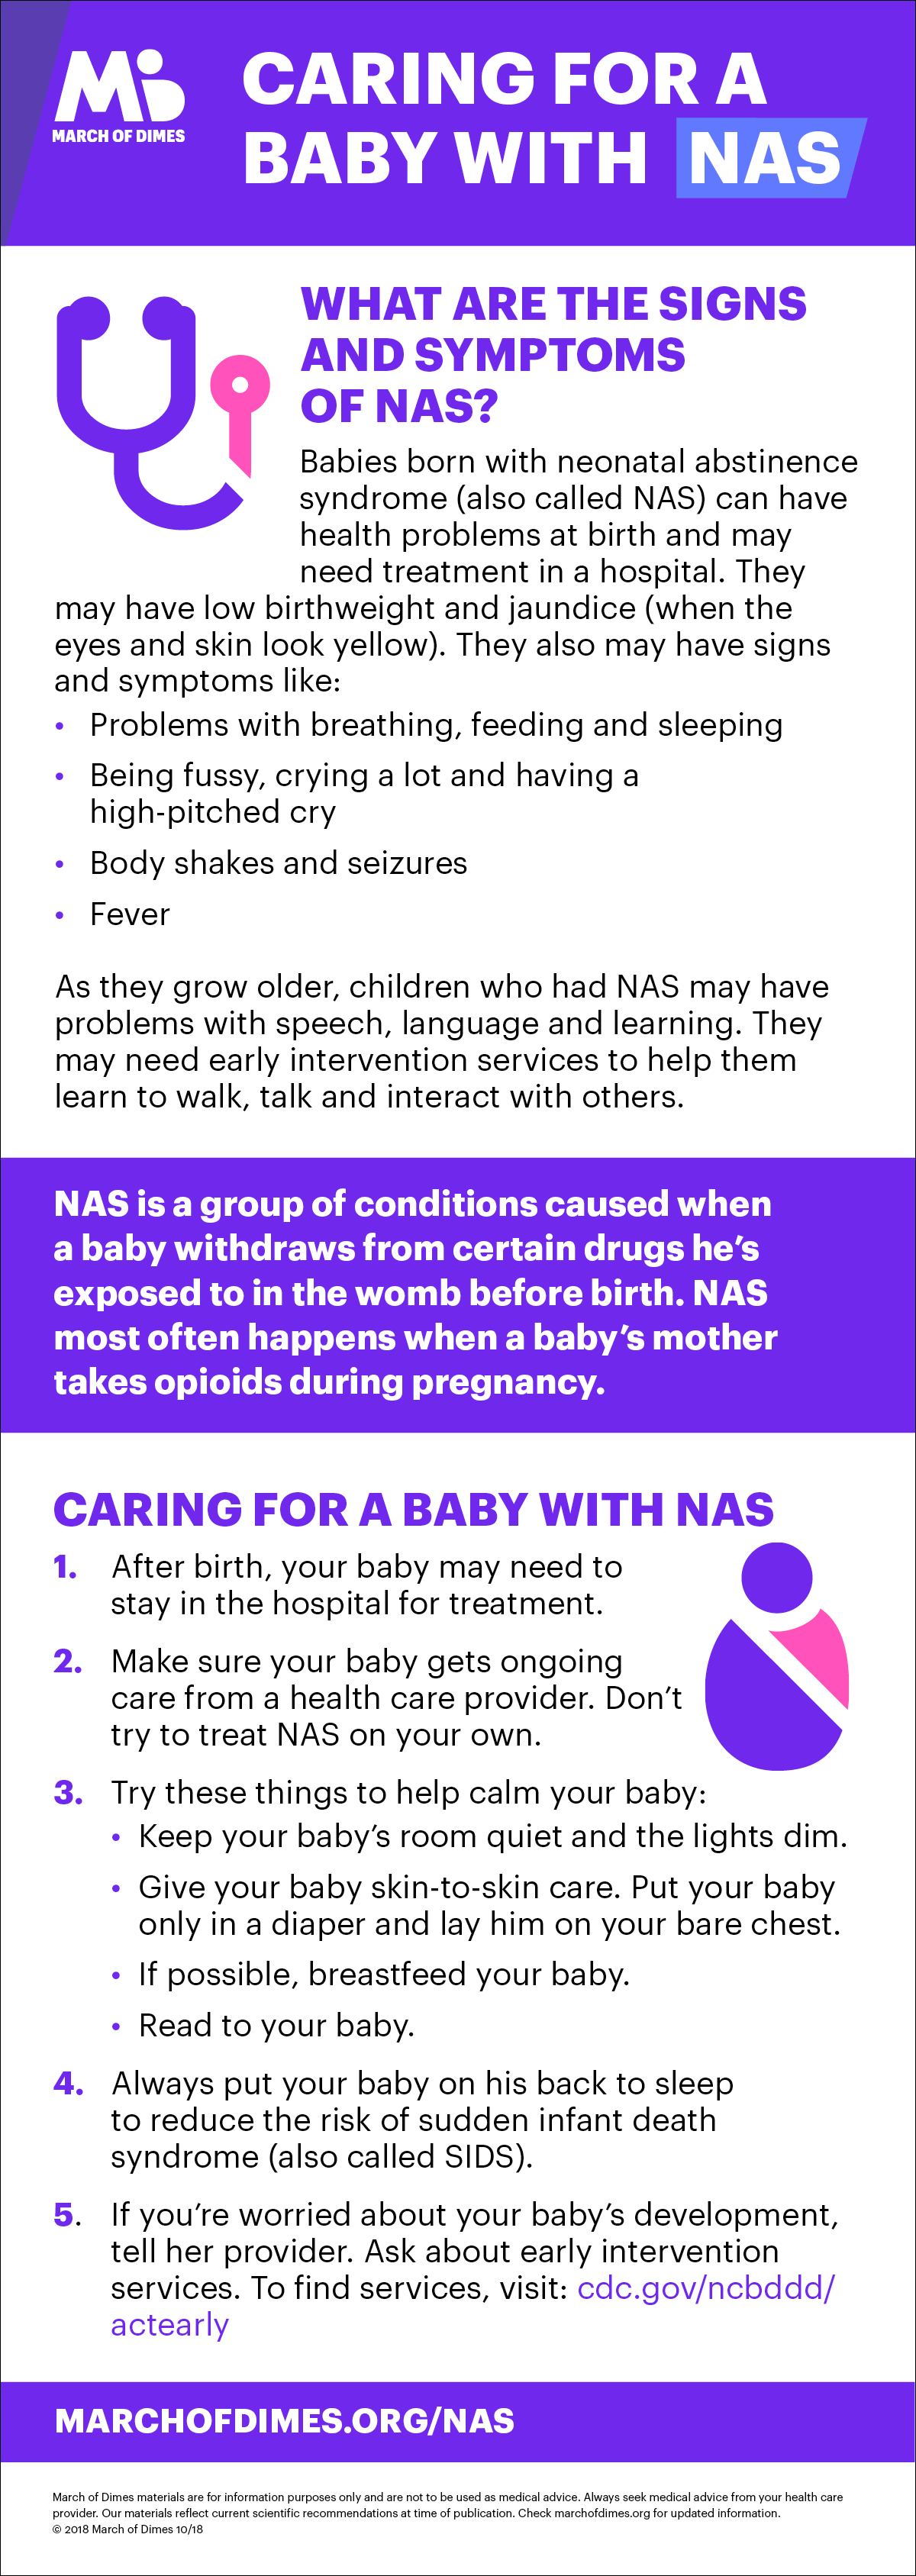 Caring for a Baby with NAS infographic